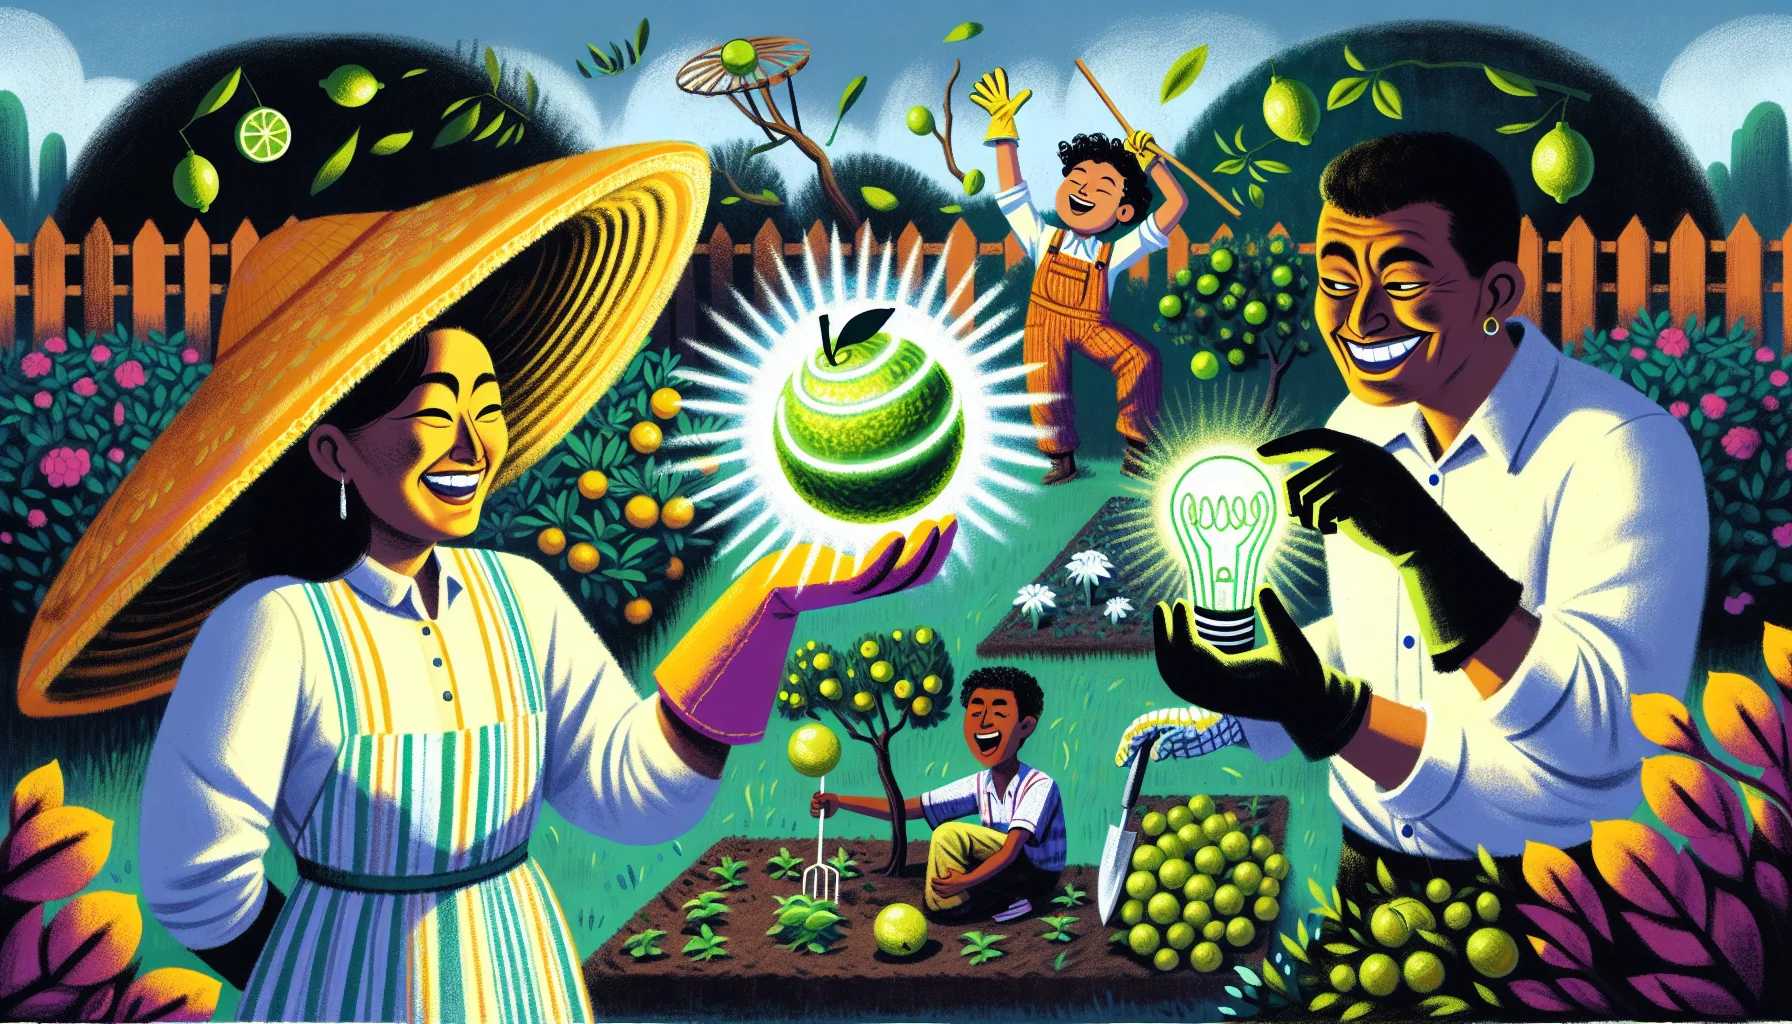 Imagine a humorous garden scene where limes are being used in unconventional ways. Picture, for instance, a South Asian woman wearing a sun hat and gloves, using a lime in place of a lamp; the fluorescent glow ironizes the lack of need for a lamp outdoors in the daylight. Nearby, a Hispanic man with a twinkle in his eye is playfully using a lime as a magic crystal ball, predicting the growth of the plants. There's also a Black child in the background, giggling while trying to use a lime as a ball, kicking it around the garden. This whimsical and lively illustration encapsulates the joyful spirit of gardening.